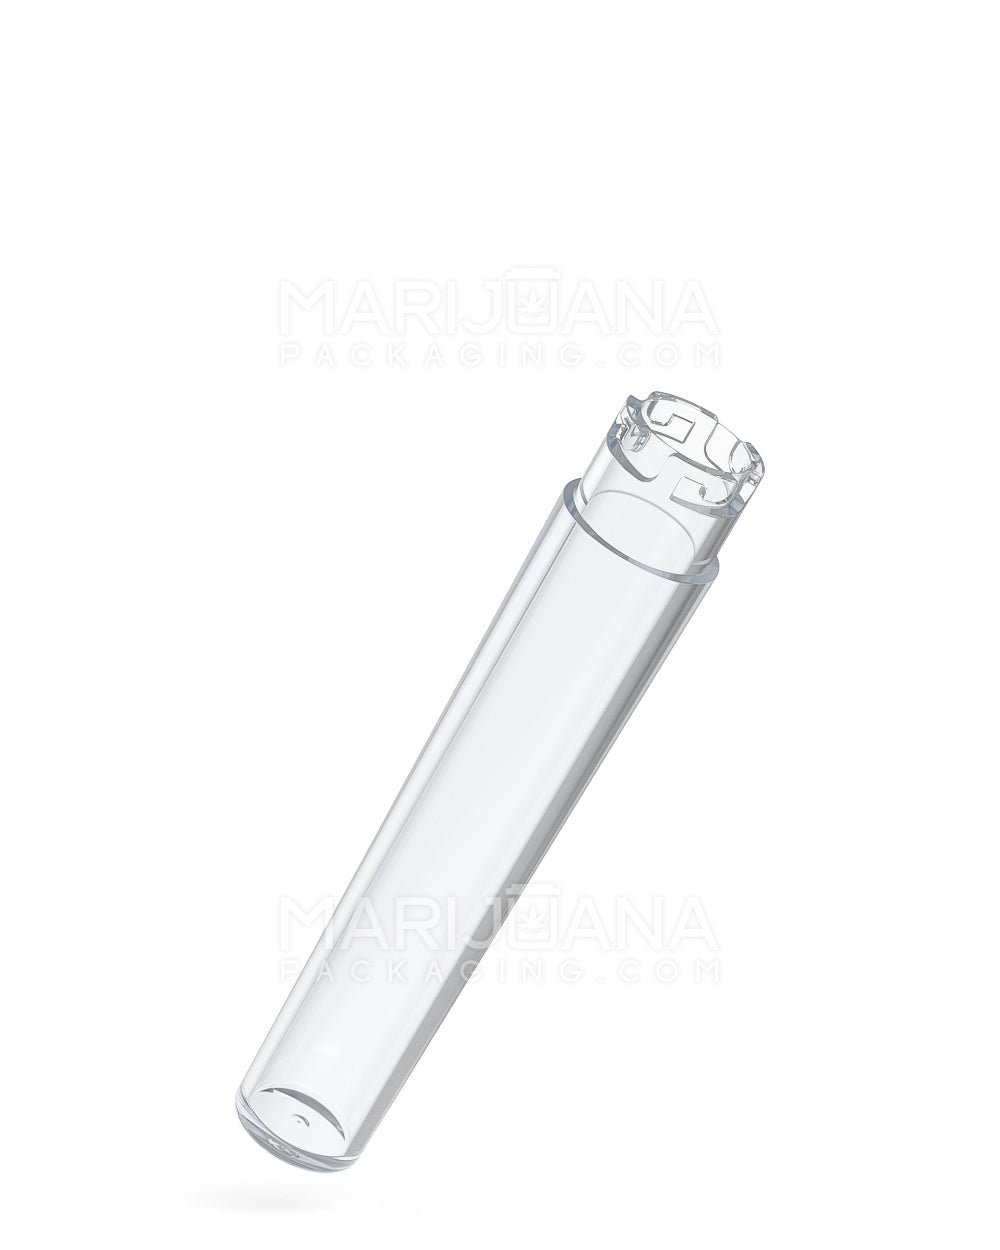 POLLEN GEAR Five10 Child Resistant Push Down & Turn Wide Long Universal Plastic Caps for Vape Tube | 155mm - Clear | Sample - 1